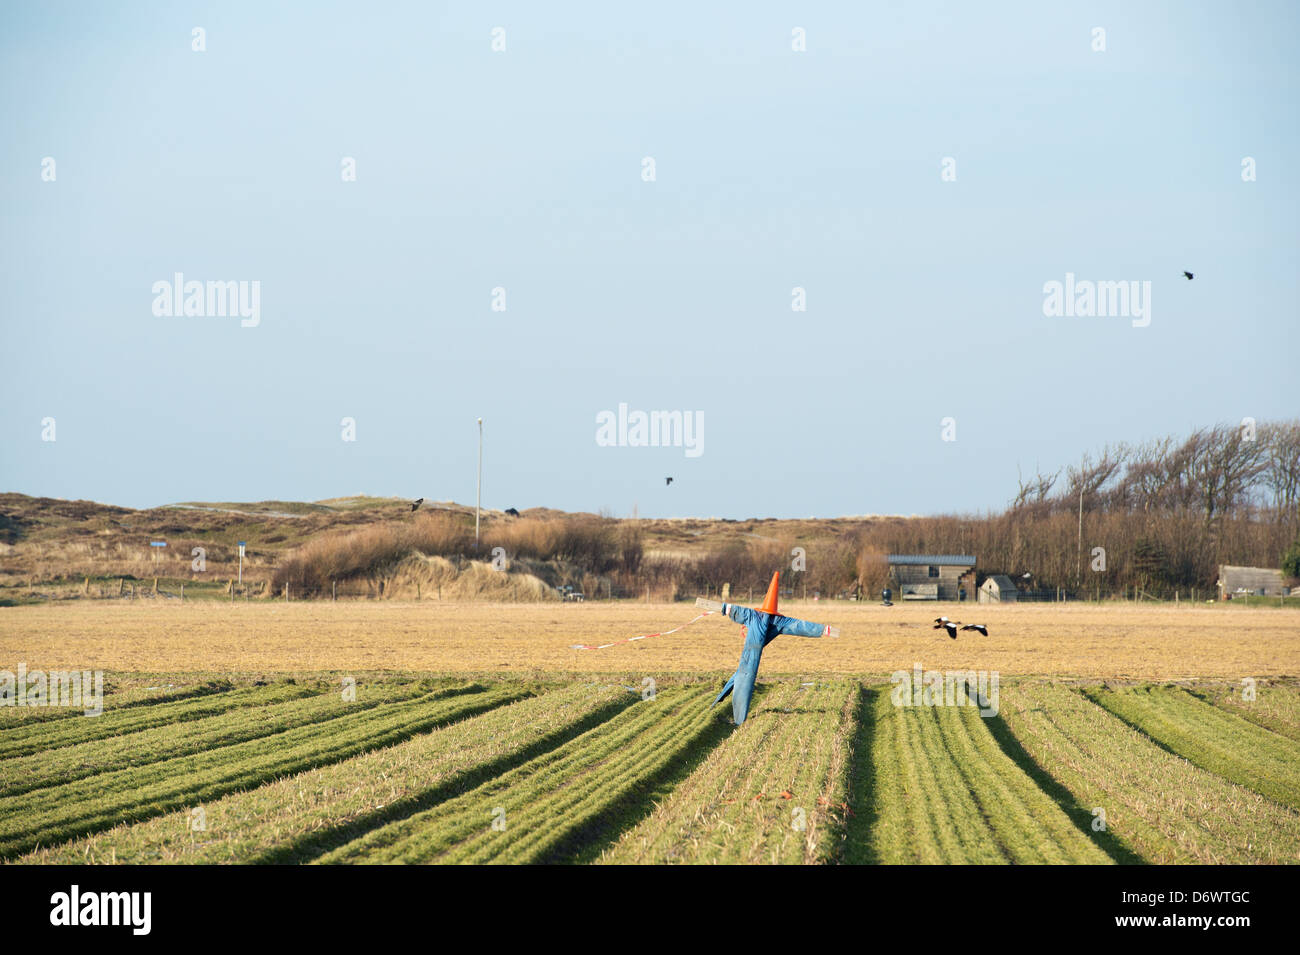 Scarecrow in agriculture field at Dutch island Texel Stock Photo